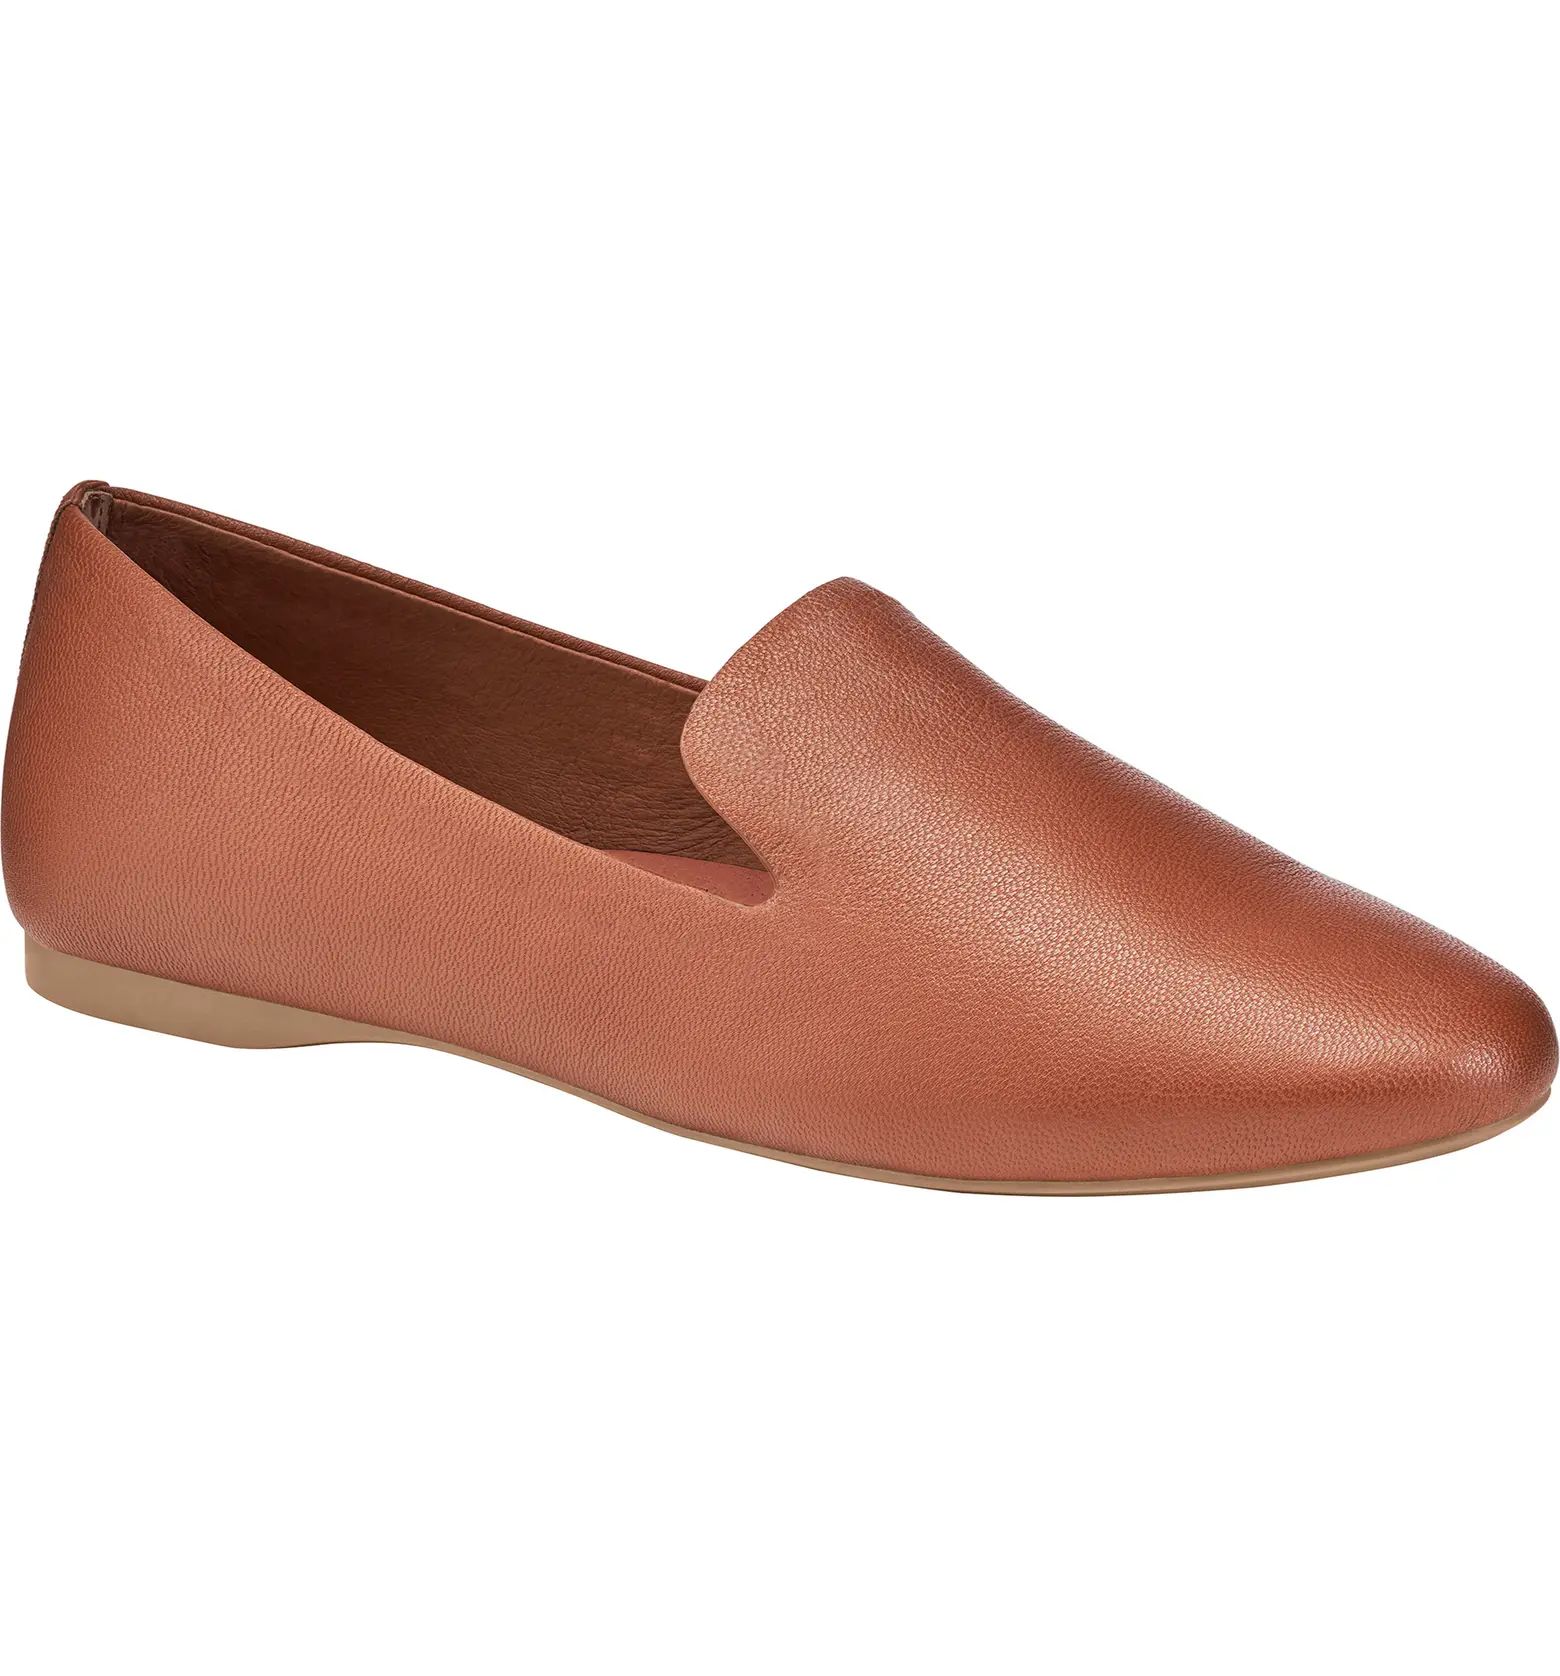 Sleek and soft, these flats are your go-to for moving around in the real world, whether you’re ... | Nordstrom